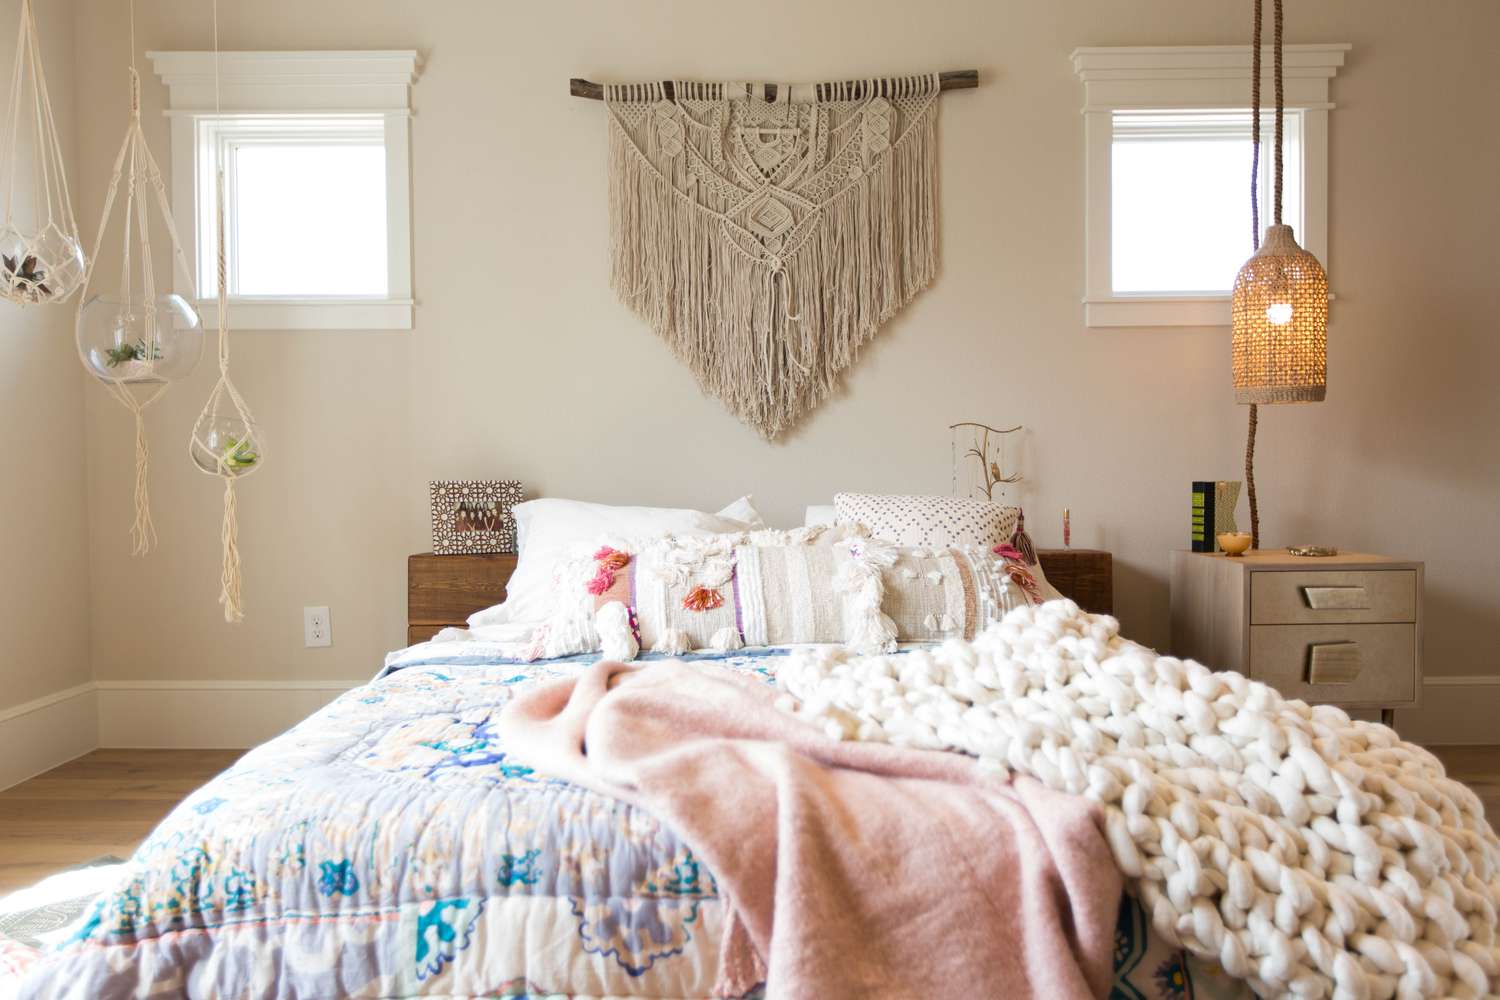 Collage showcasing the beauty of budget-friendly bedroom decor